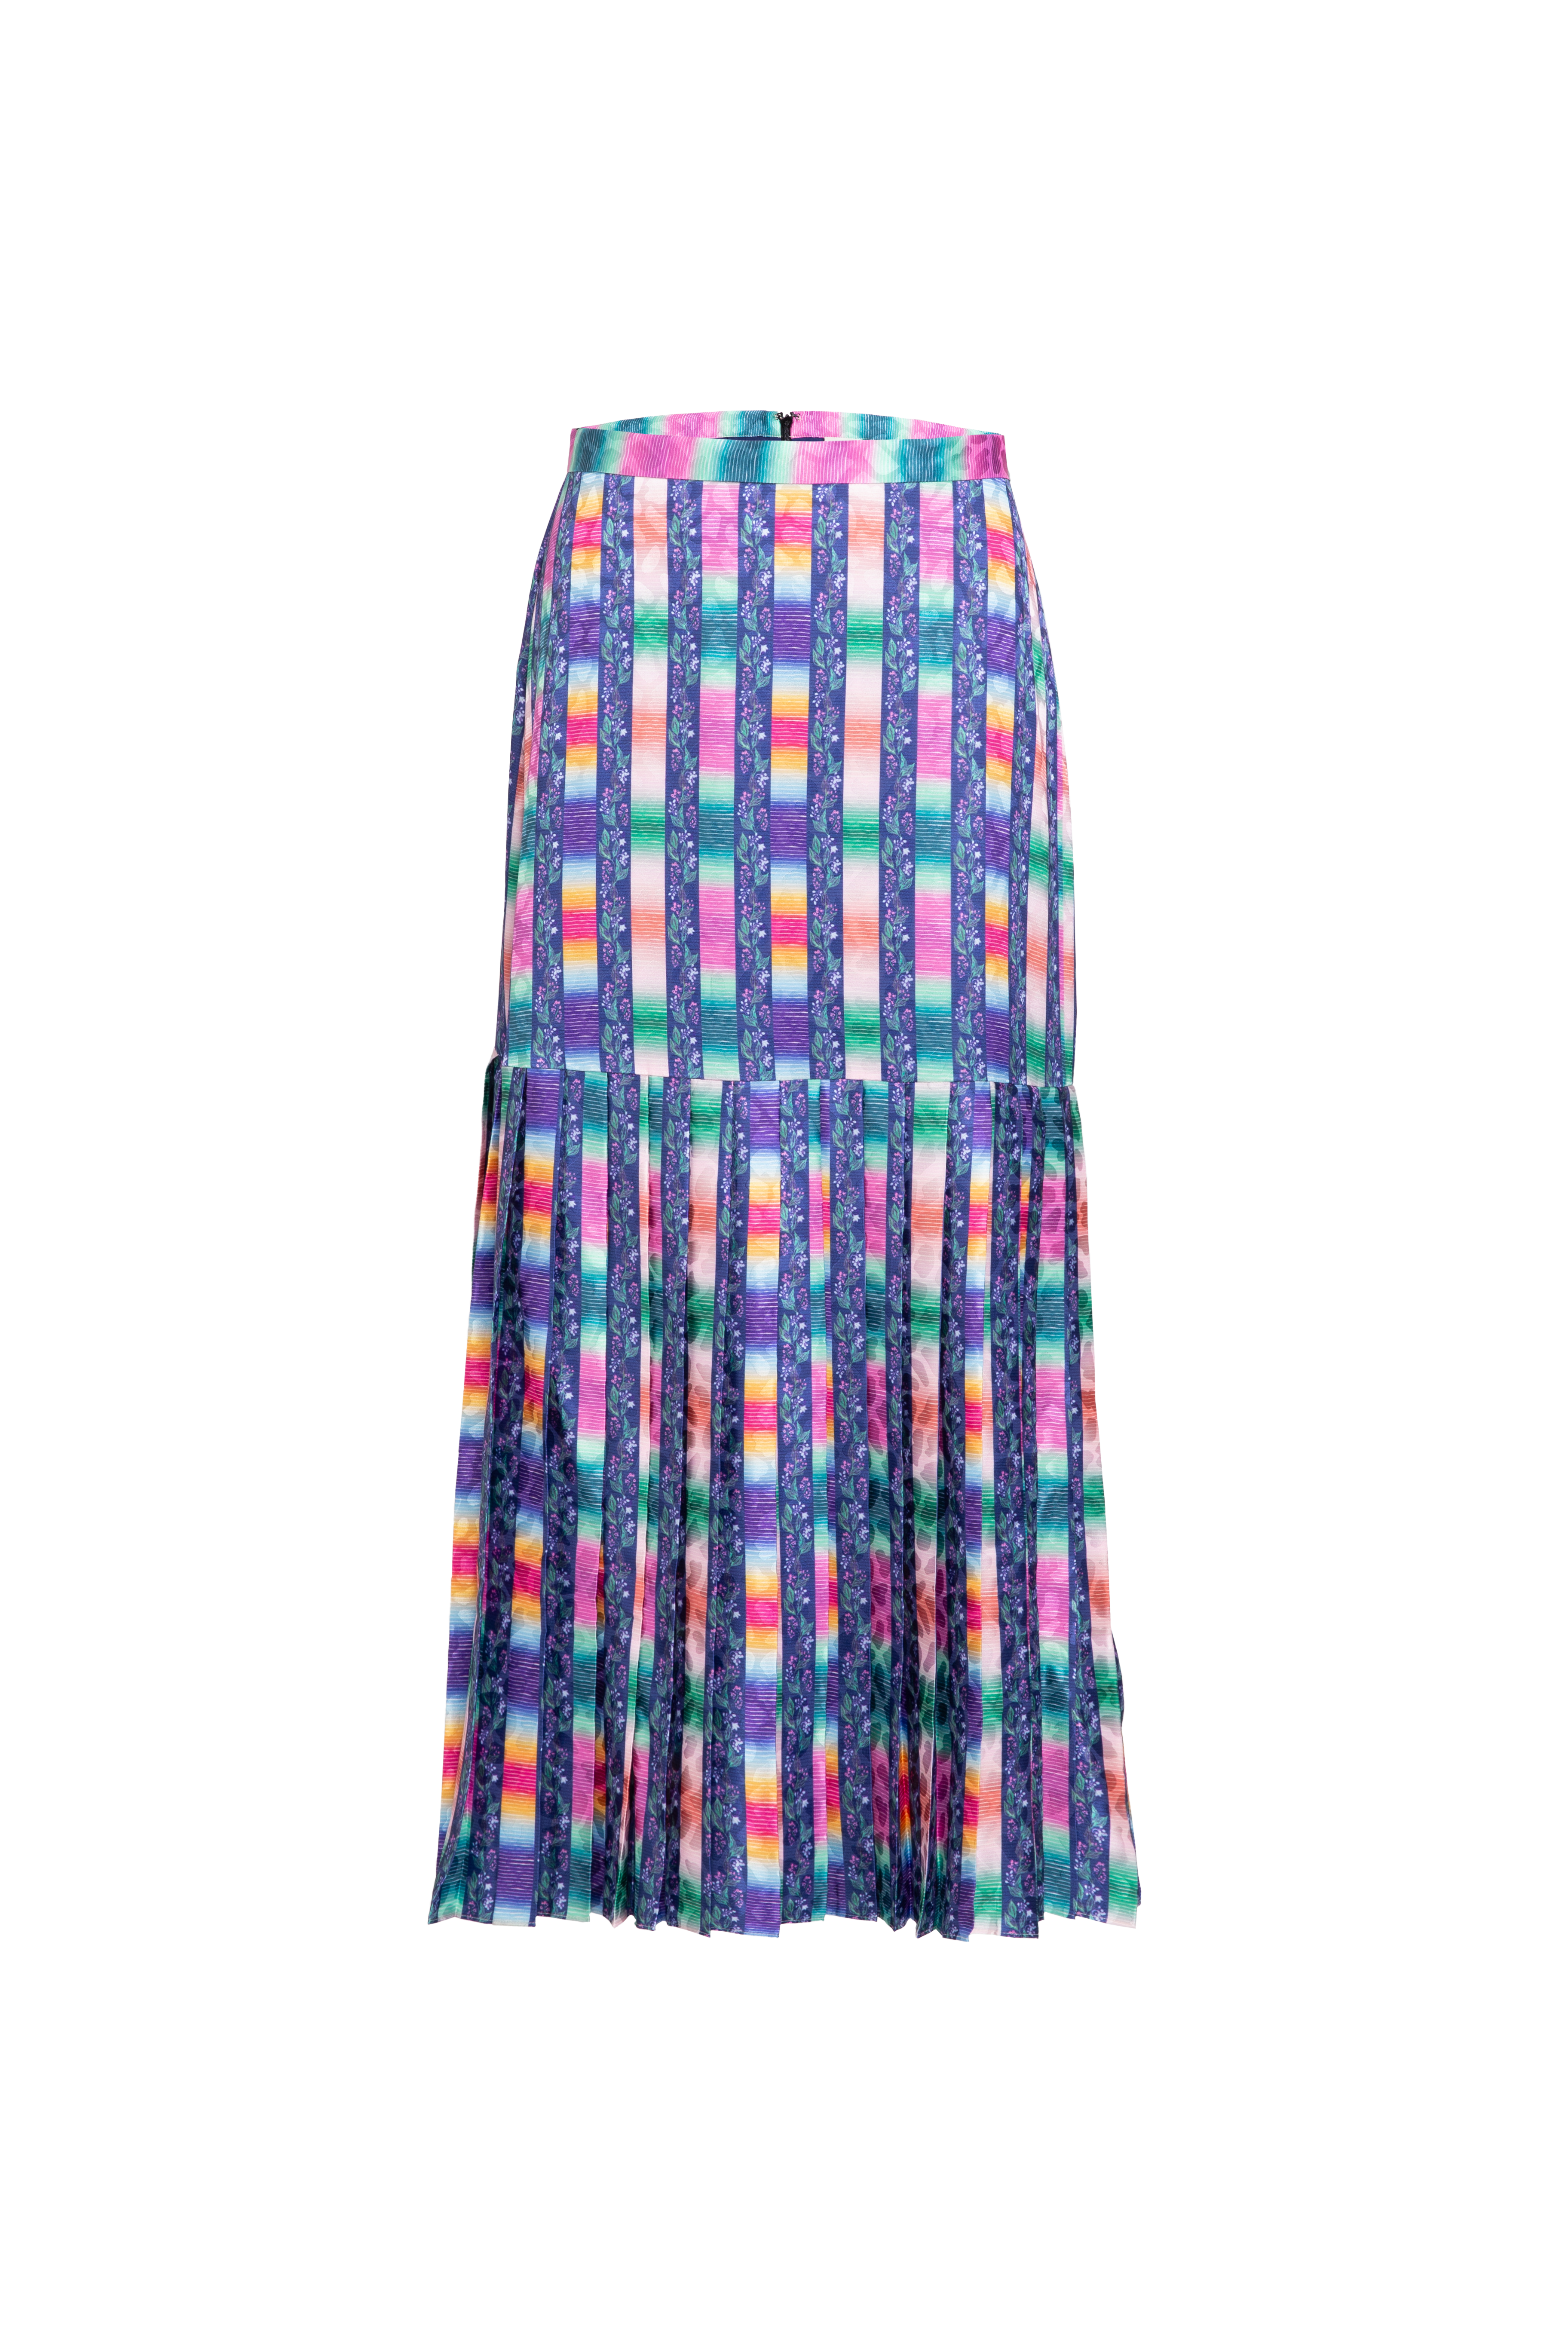 Diana E Skirt in Hedgerow Flora